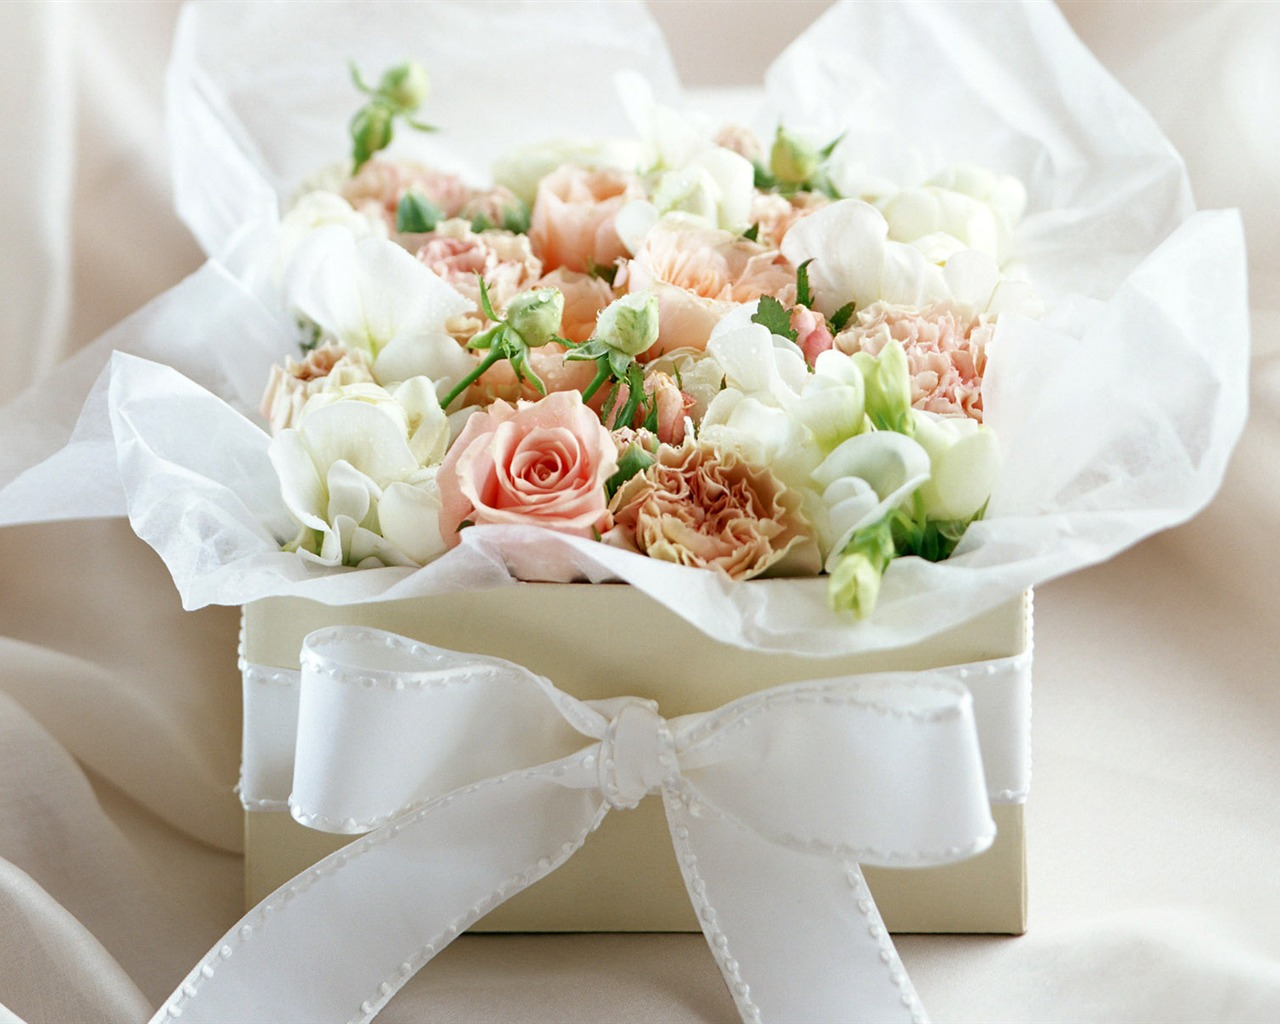 Flowers and gifts wallpaper (1) #7 - 1280x1024